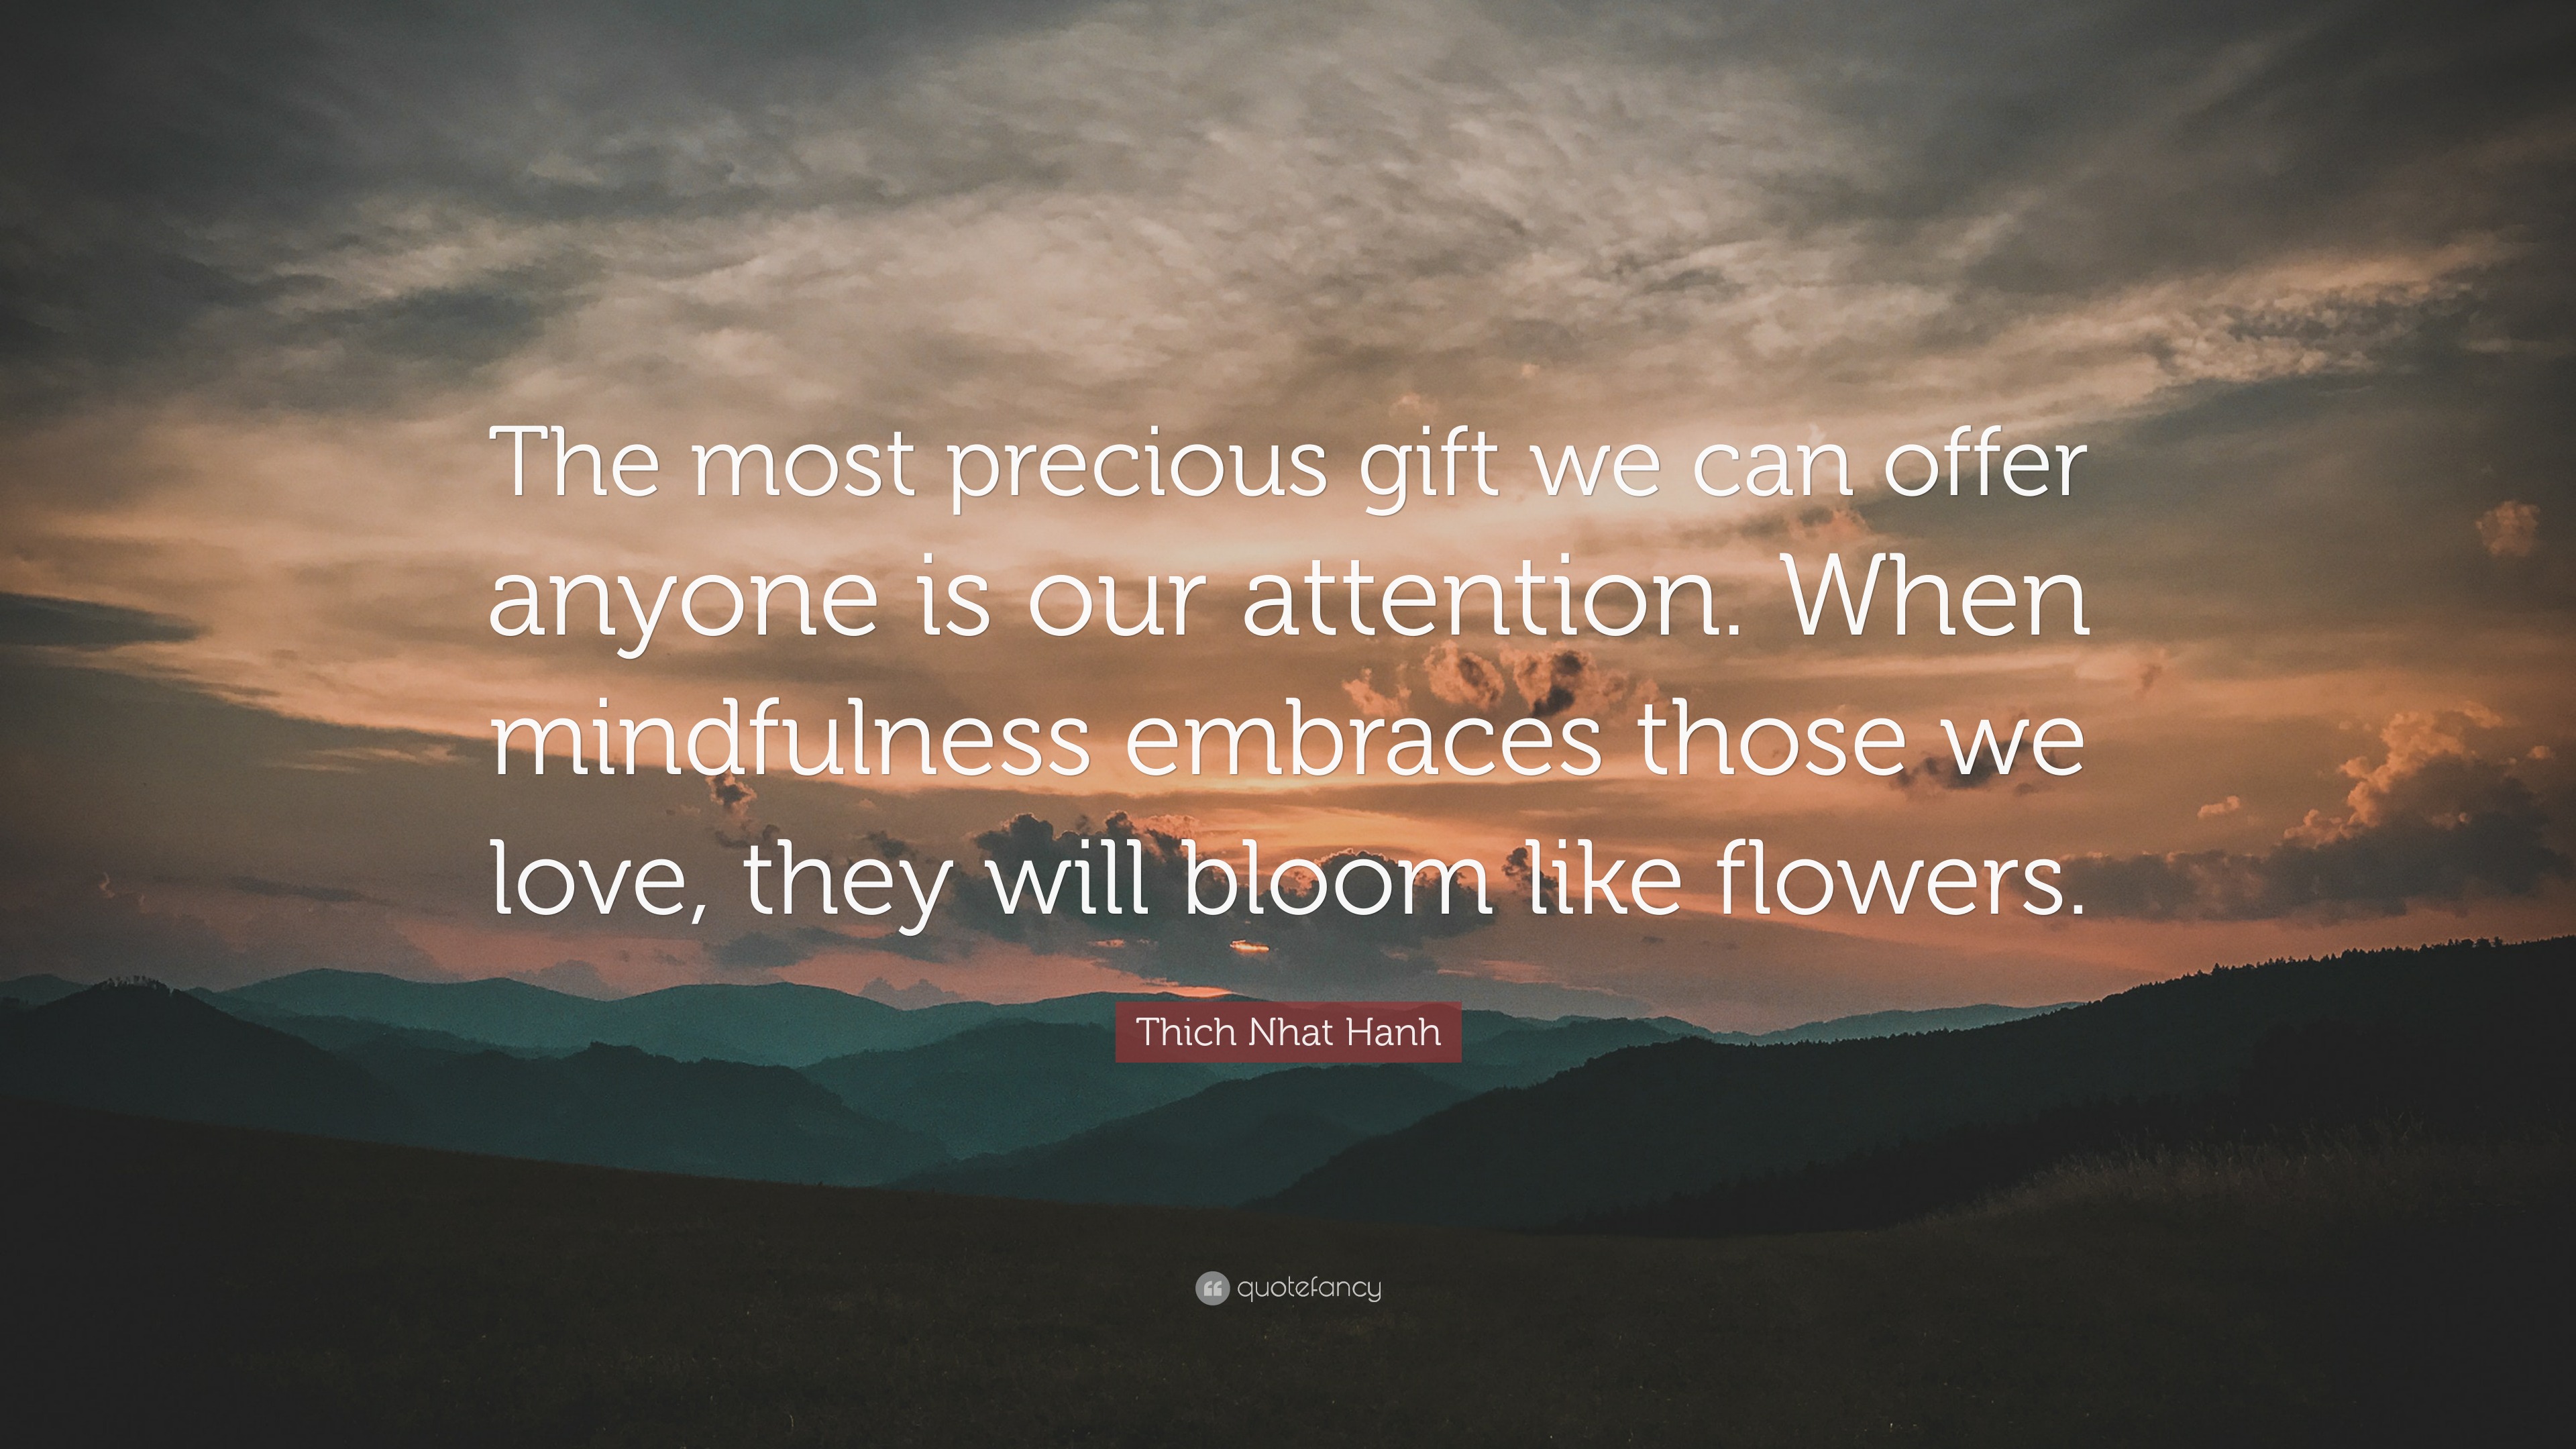 Thich Nhat Hanh Quote: “The most precious gift we can offer anyone is ...